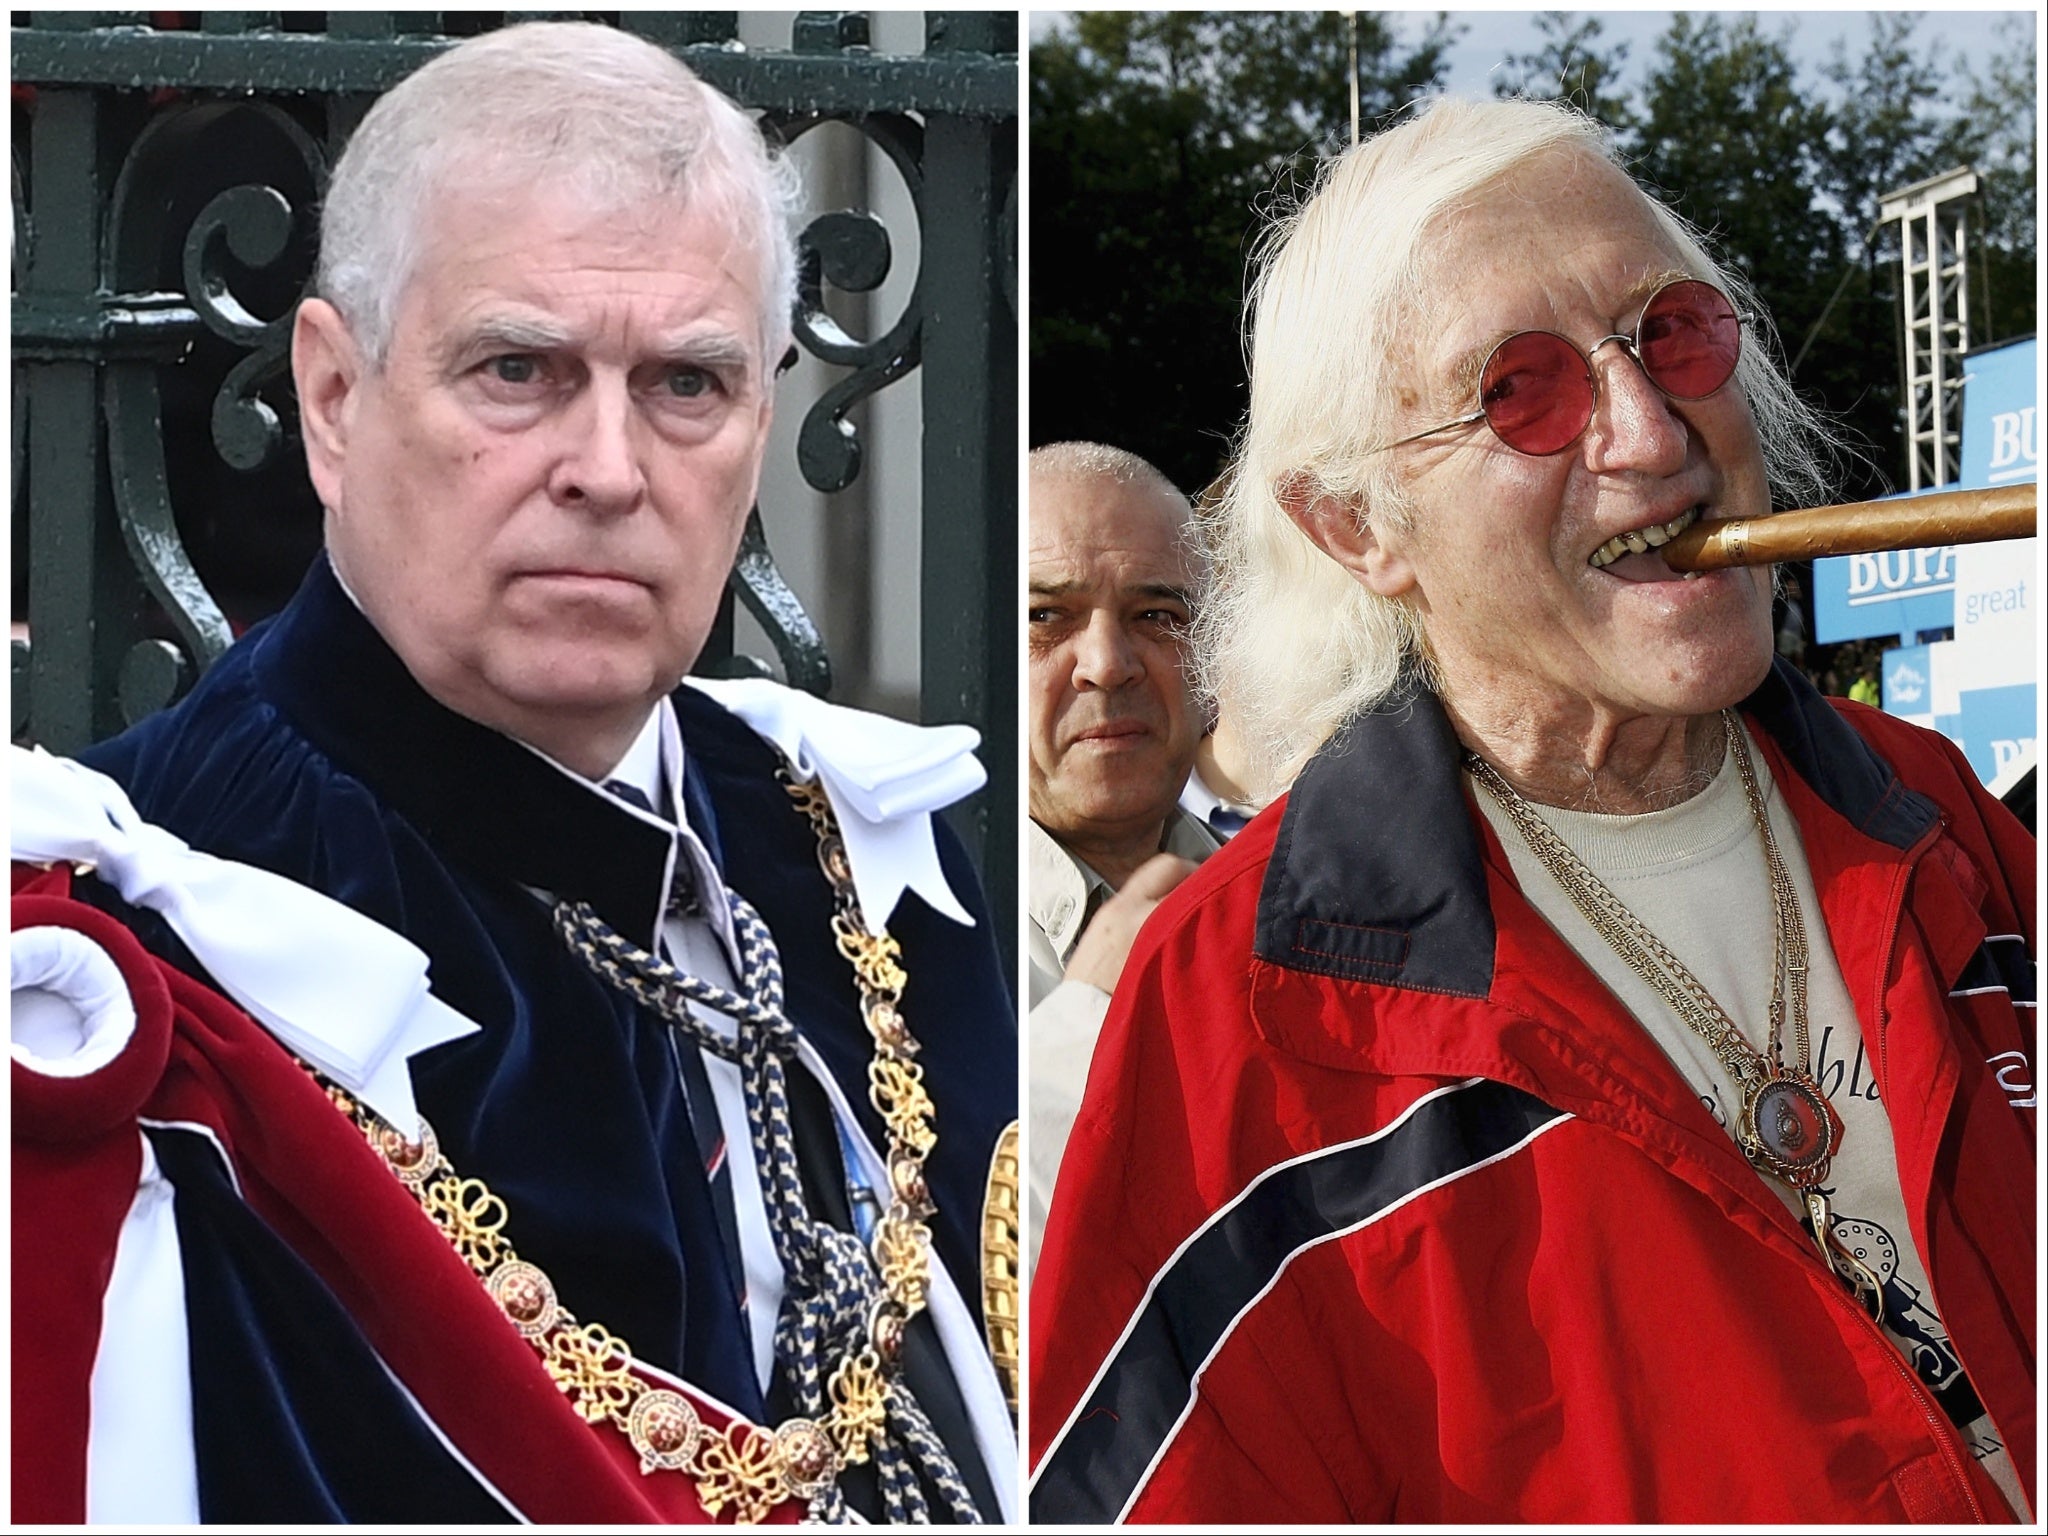 Prince Andrew and Jimmy Savile – it was known that Savile was close to the royal family, particularly Charles